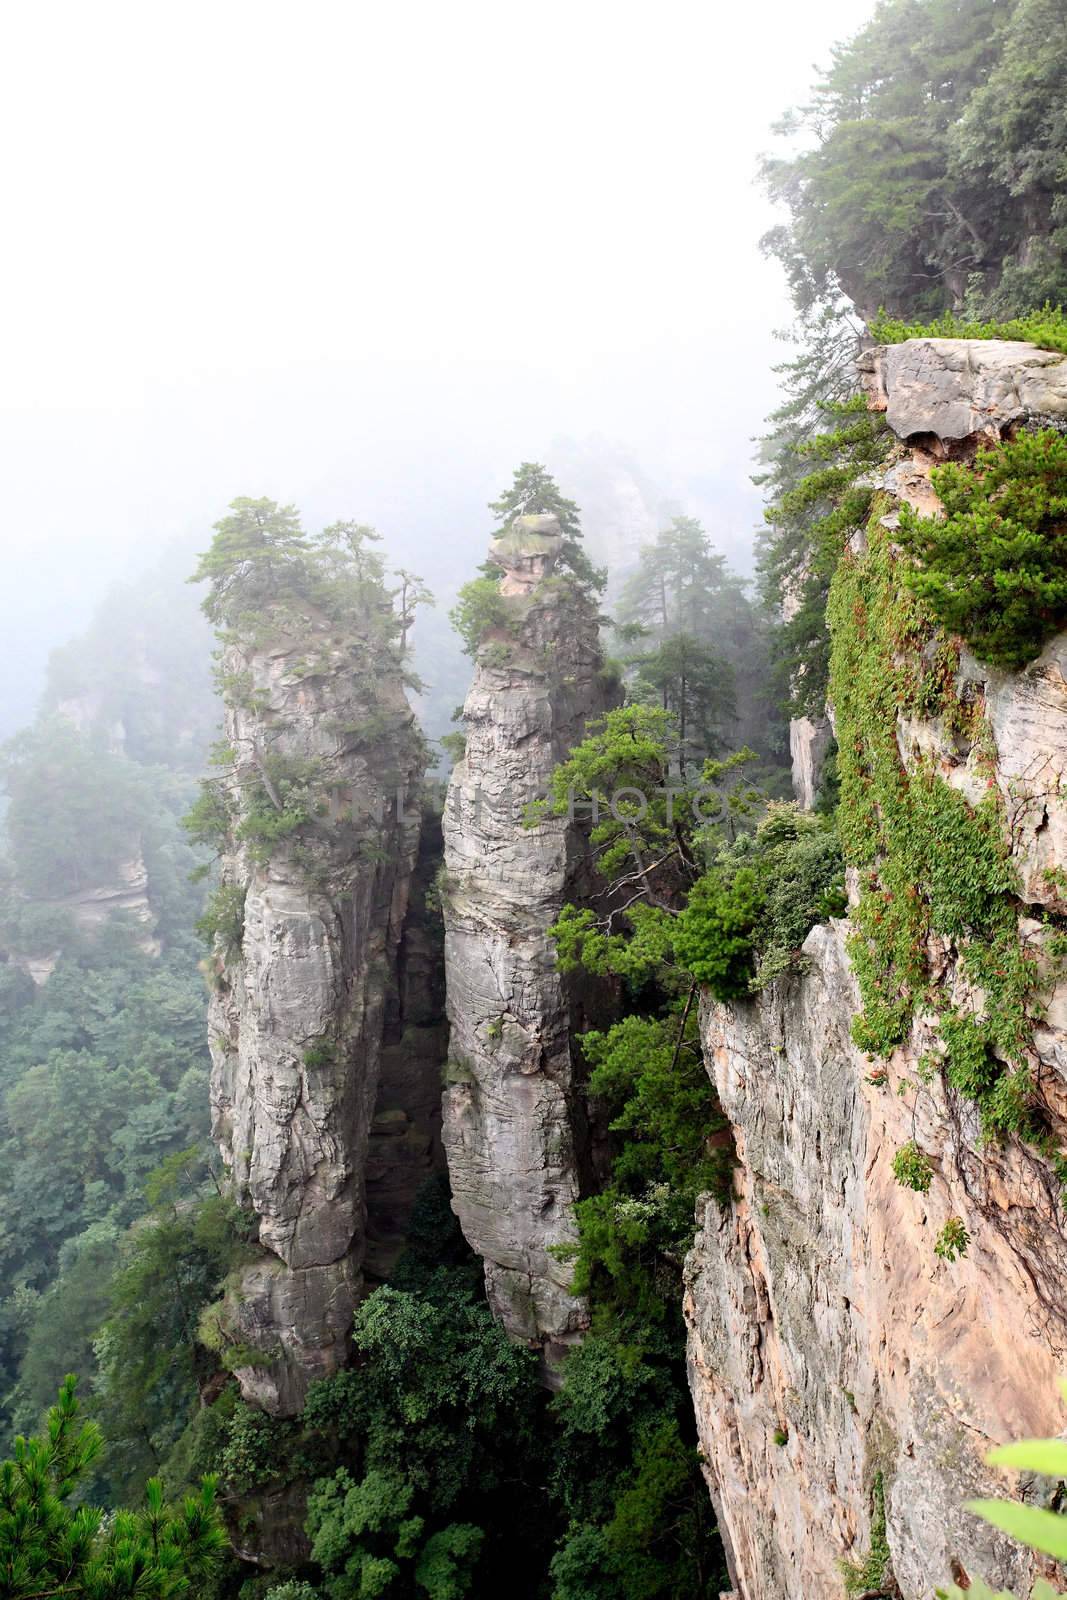 The scenery of the China national forest park - Zhangjiajie